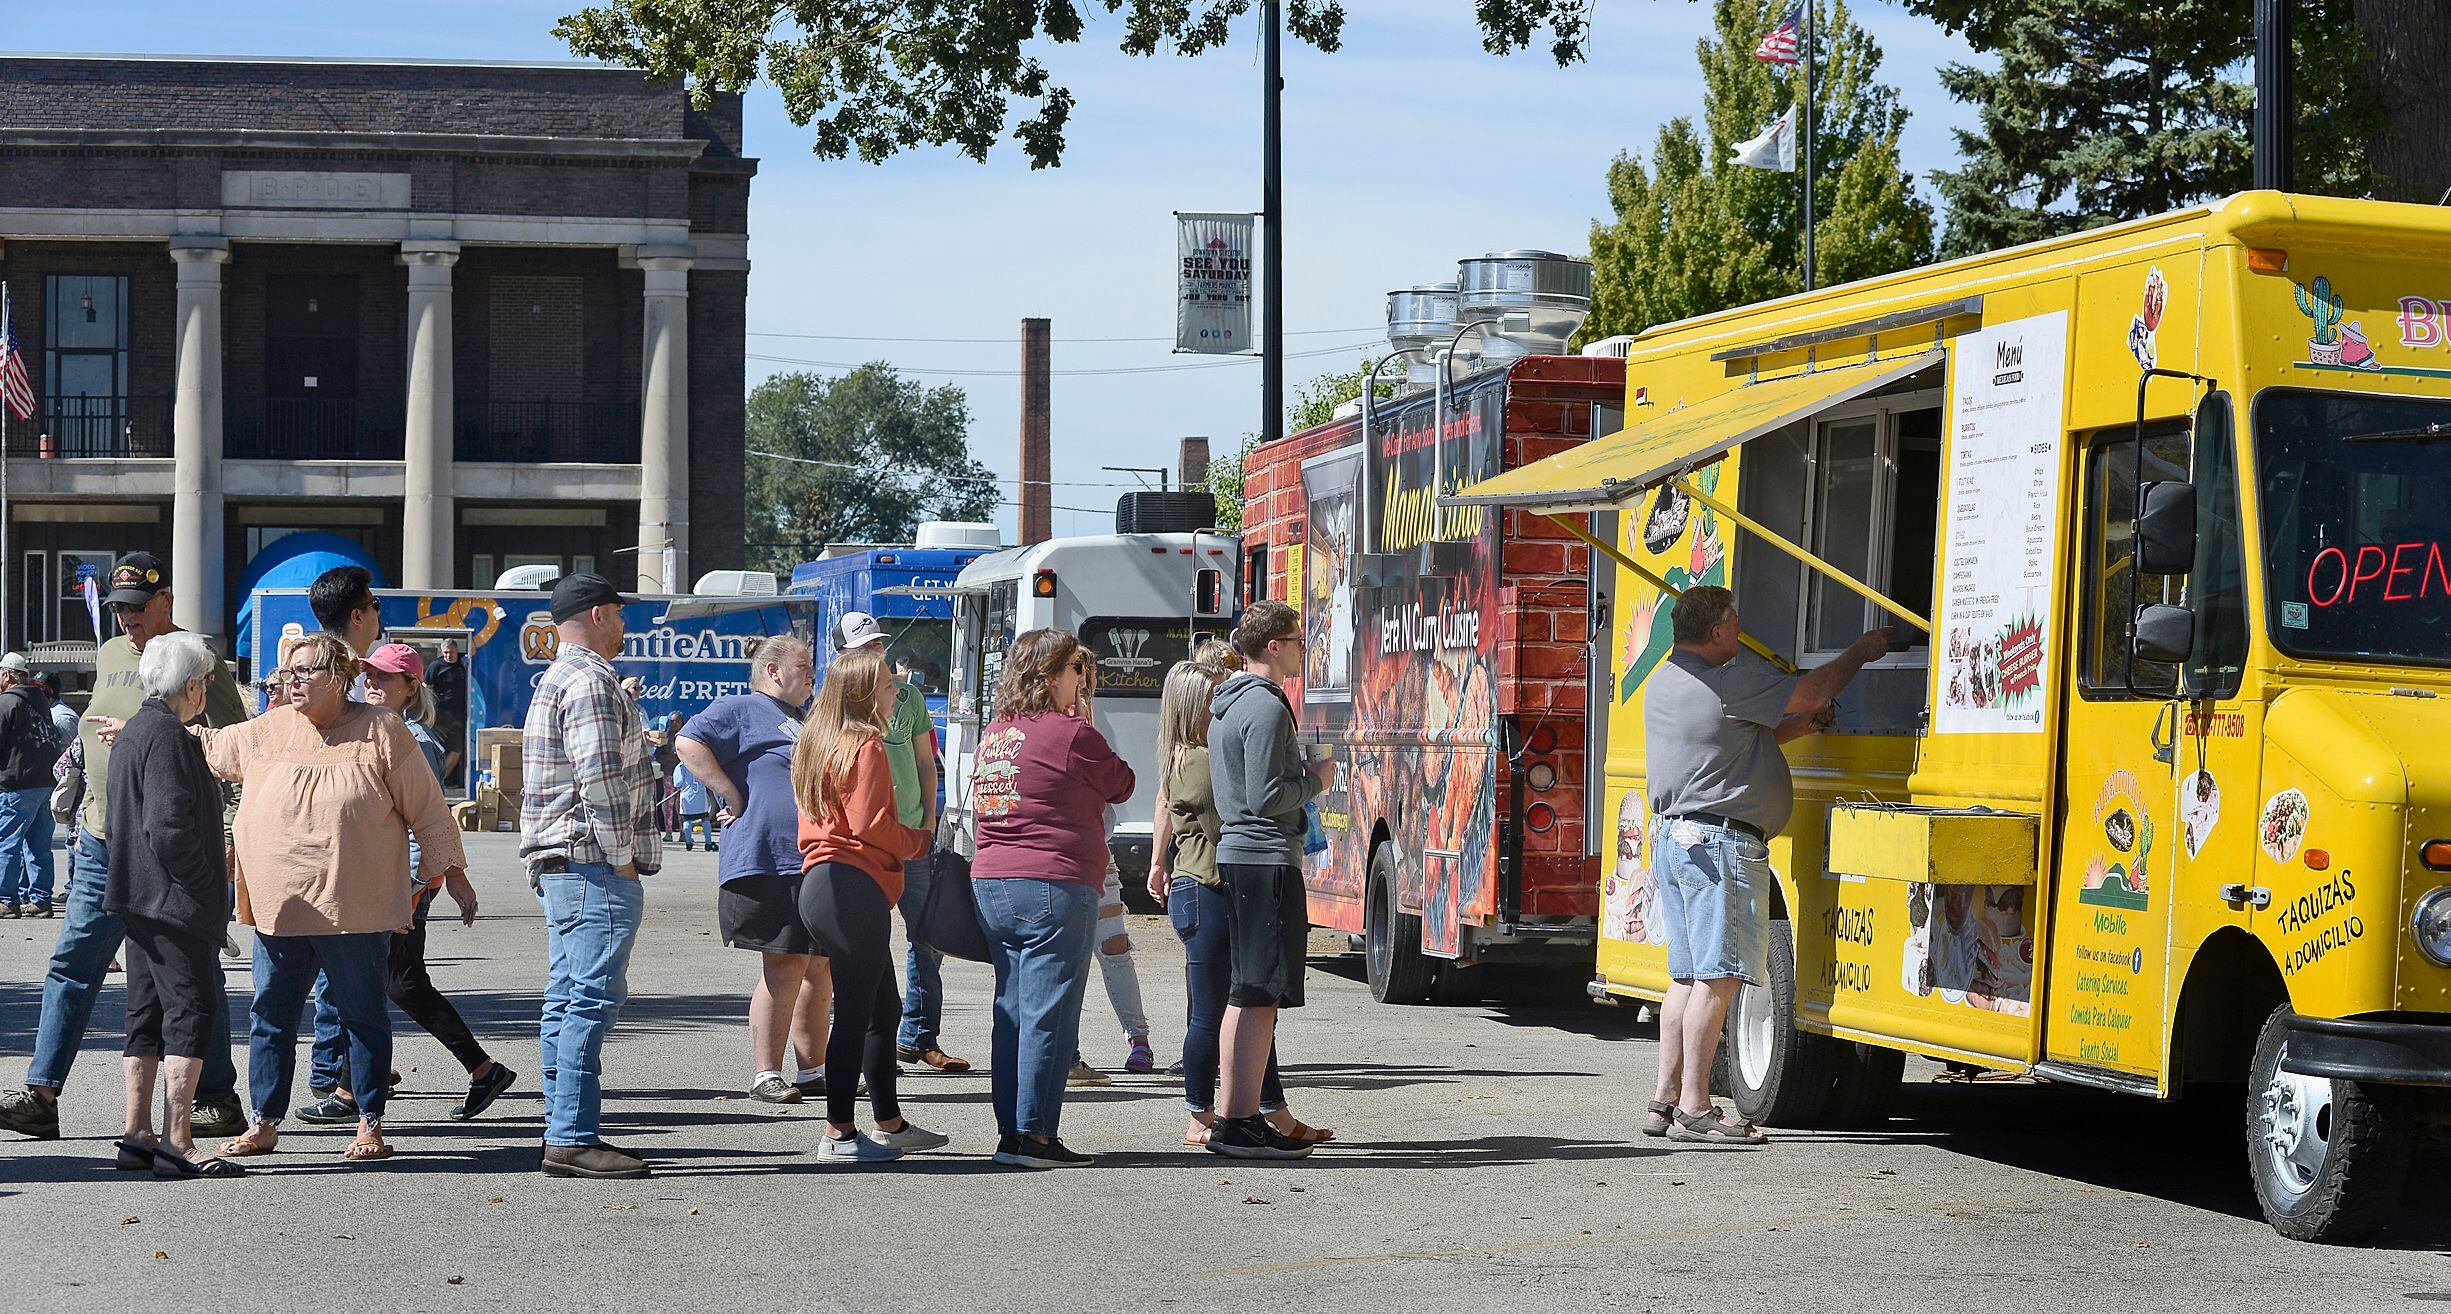 Visitors lined up for several different food offerings Saturday, Sept. 25, 2021, during the Food Truck Festival at City Park in Streator. The festival was sponsored by Streatscapes, the same group responsible for Walldogs.